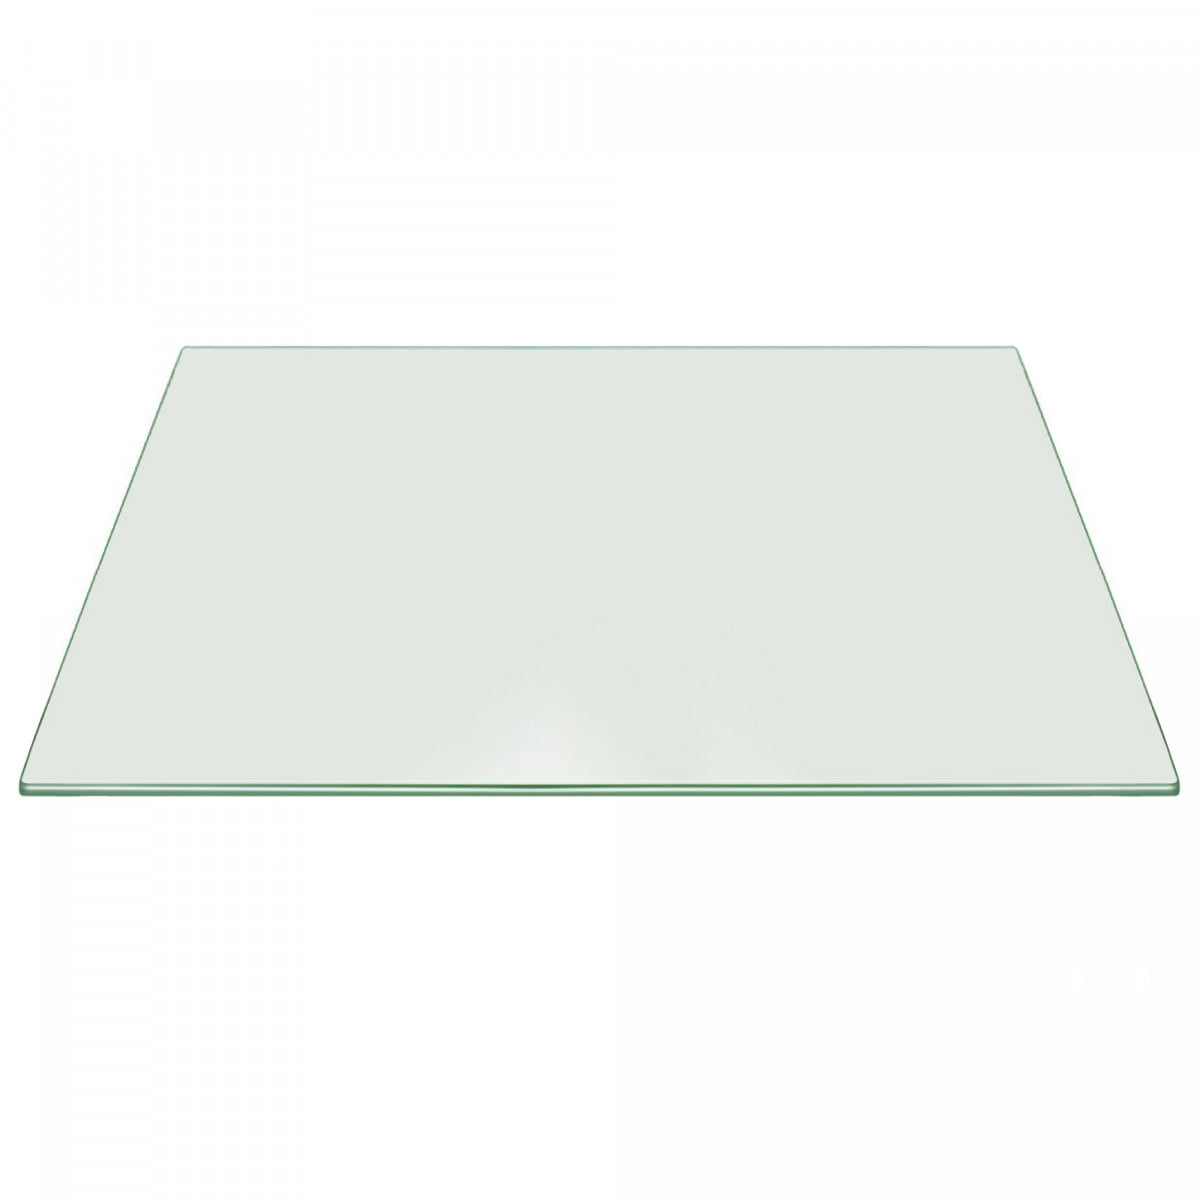 Flat Polish By Dulles Glass 3/8" Thick Tempered Glass Details about   Round Glass Table 